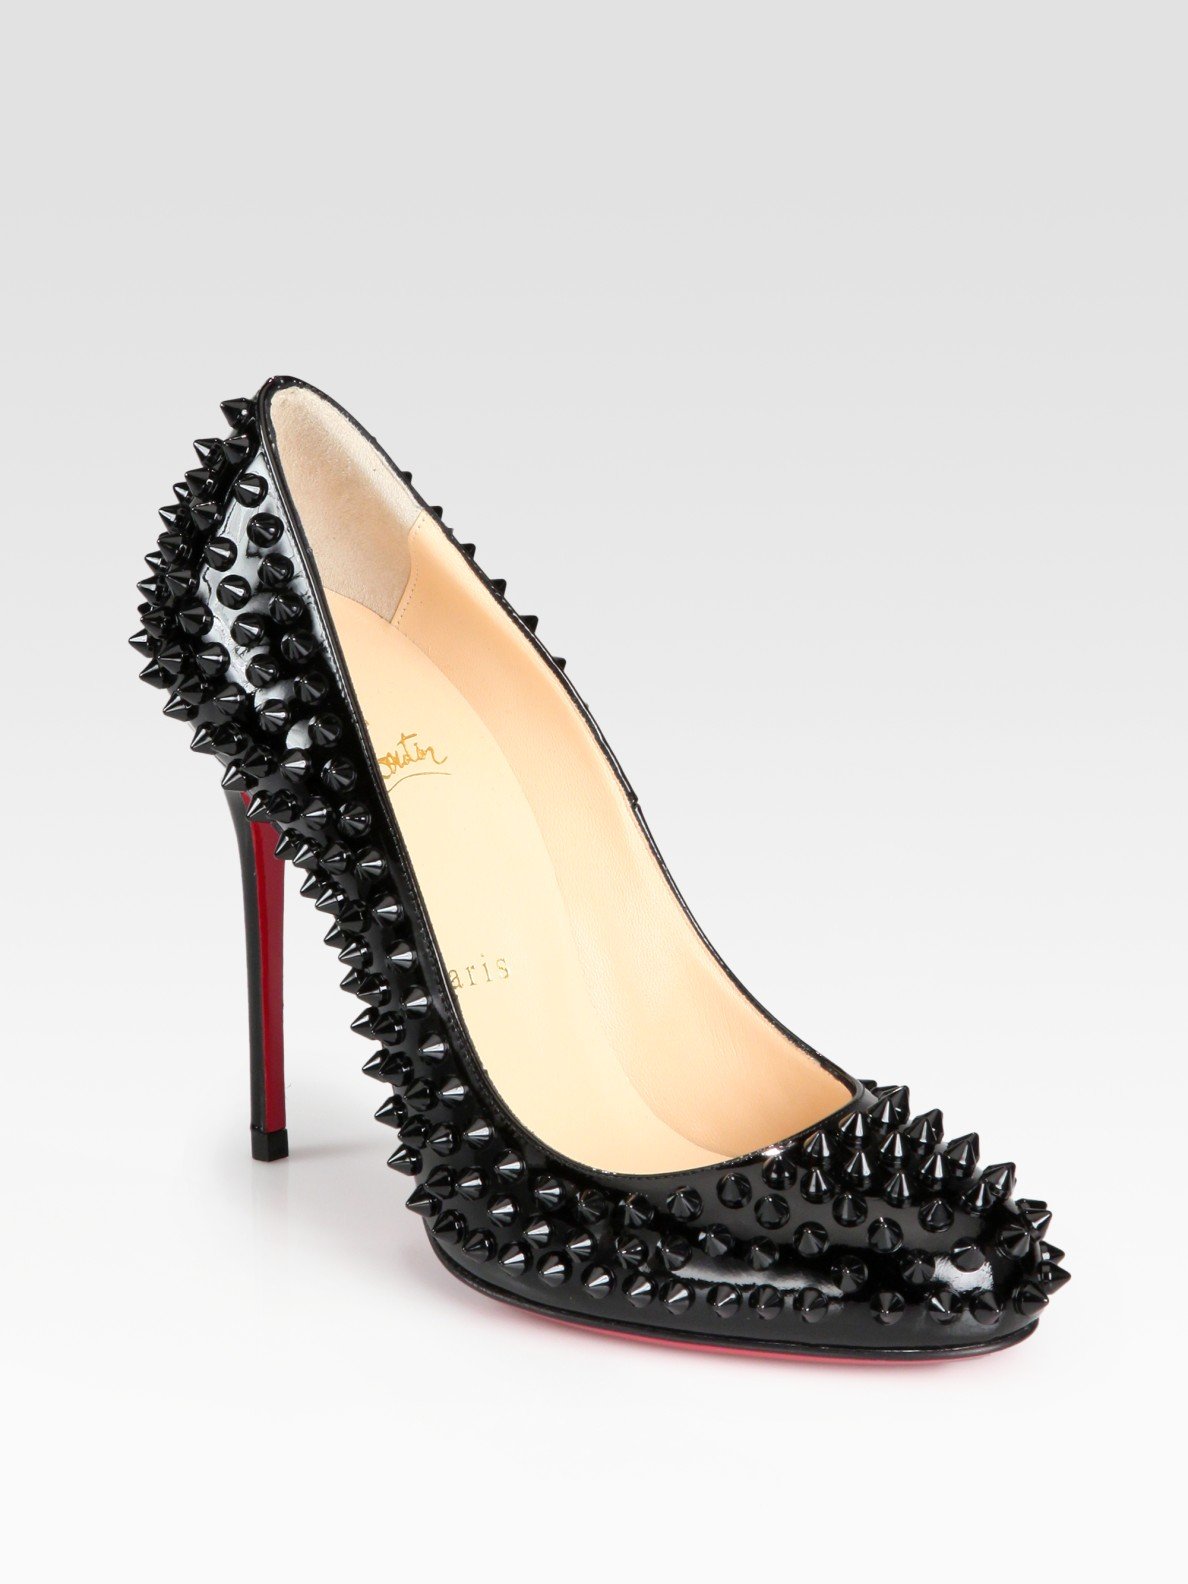 Christian louboutin Fifi Spiked Patent Leather Pumps in Black | Lyst